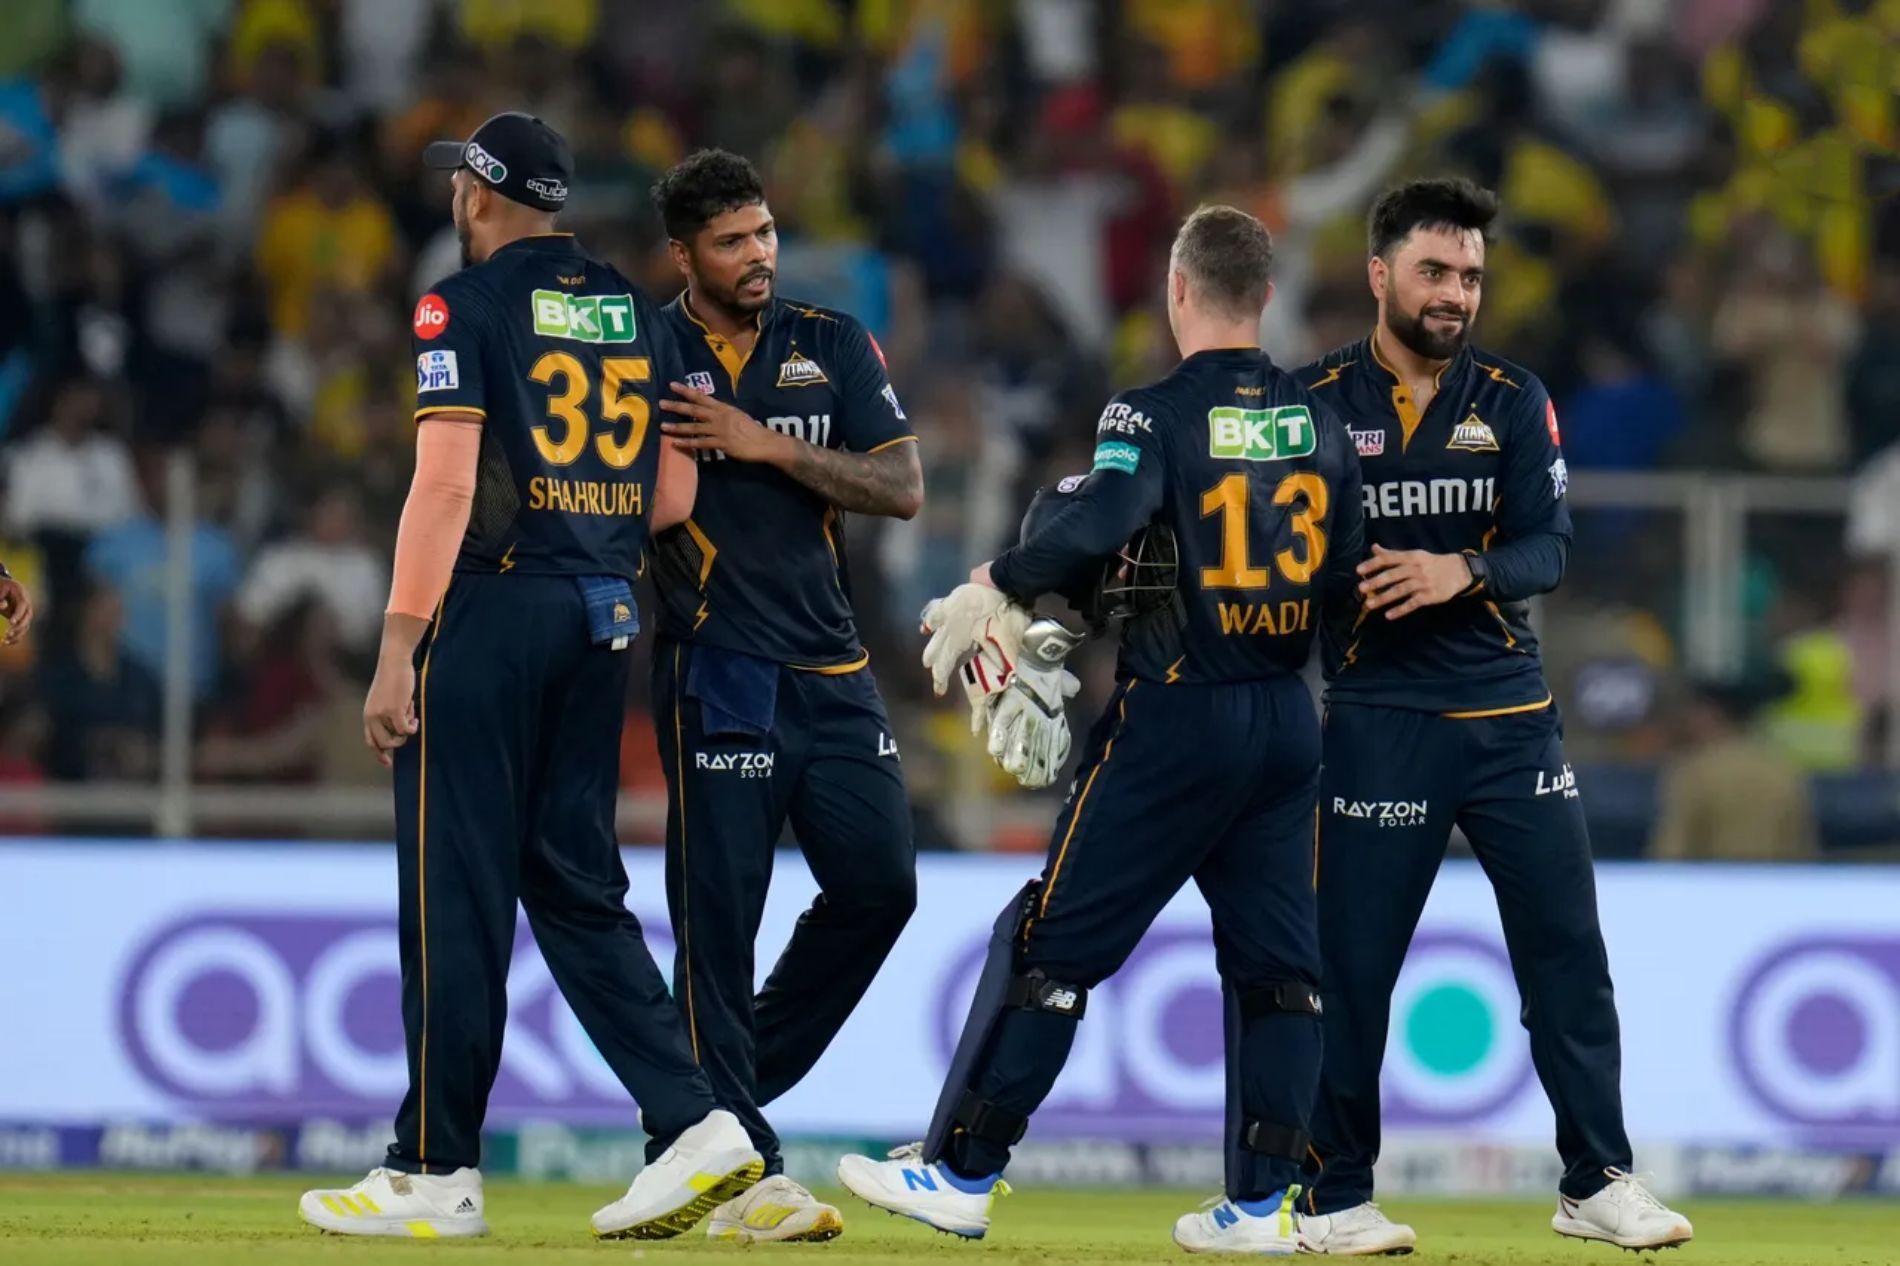 Gujarat Titans&rsquo; bowlers will need to keep Hyderabad&rsquo;s batters in check. (Pic: BCCI/ iplt20.com)